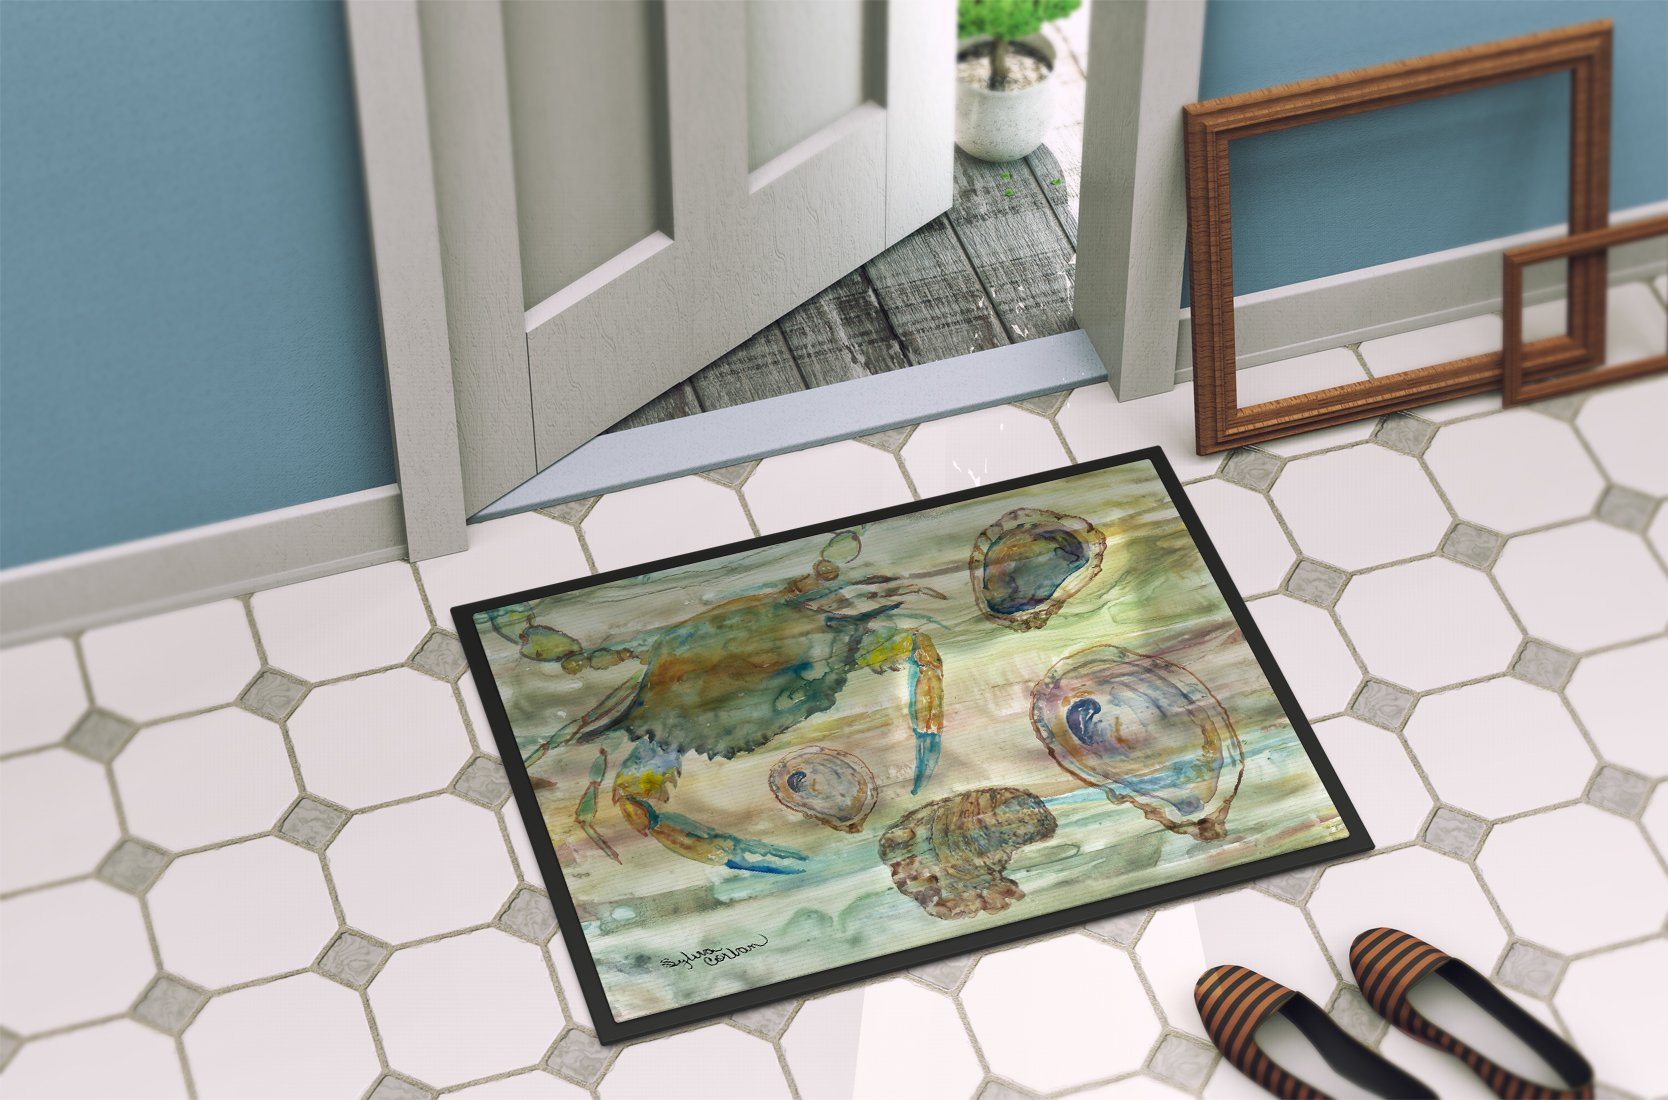 Crab, Shrimp and Oyster Sunset Indoor or Outdoor Mat 24x36 SC2017JMAT by Caroline's Treasures